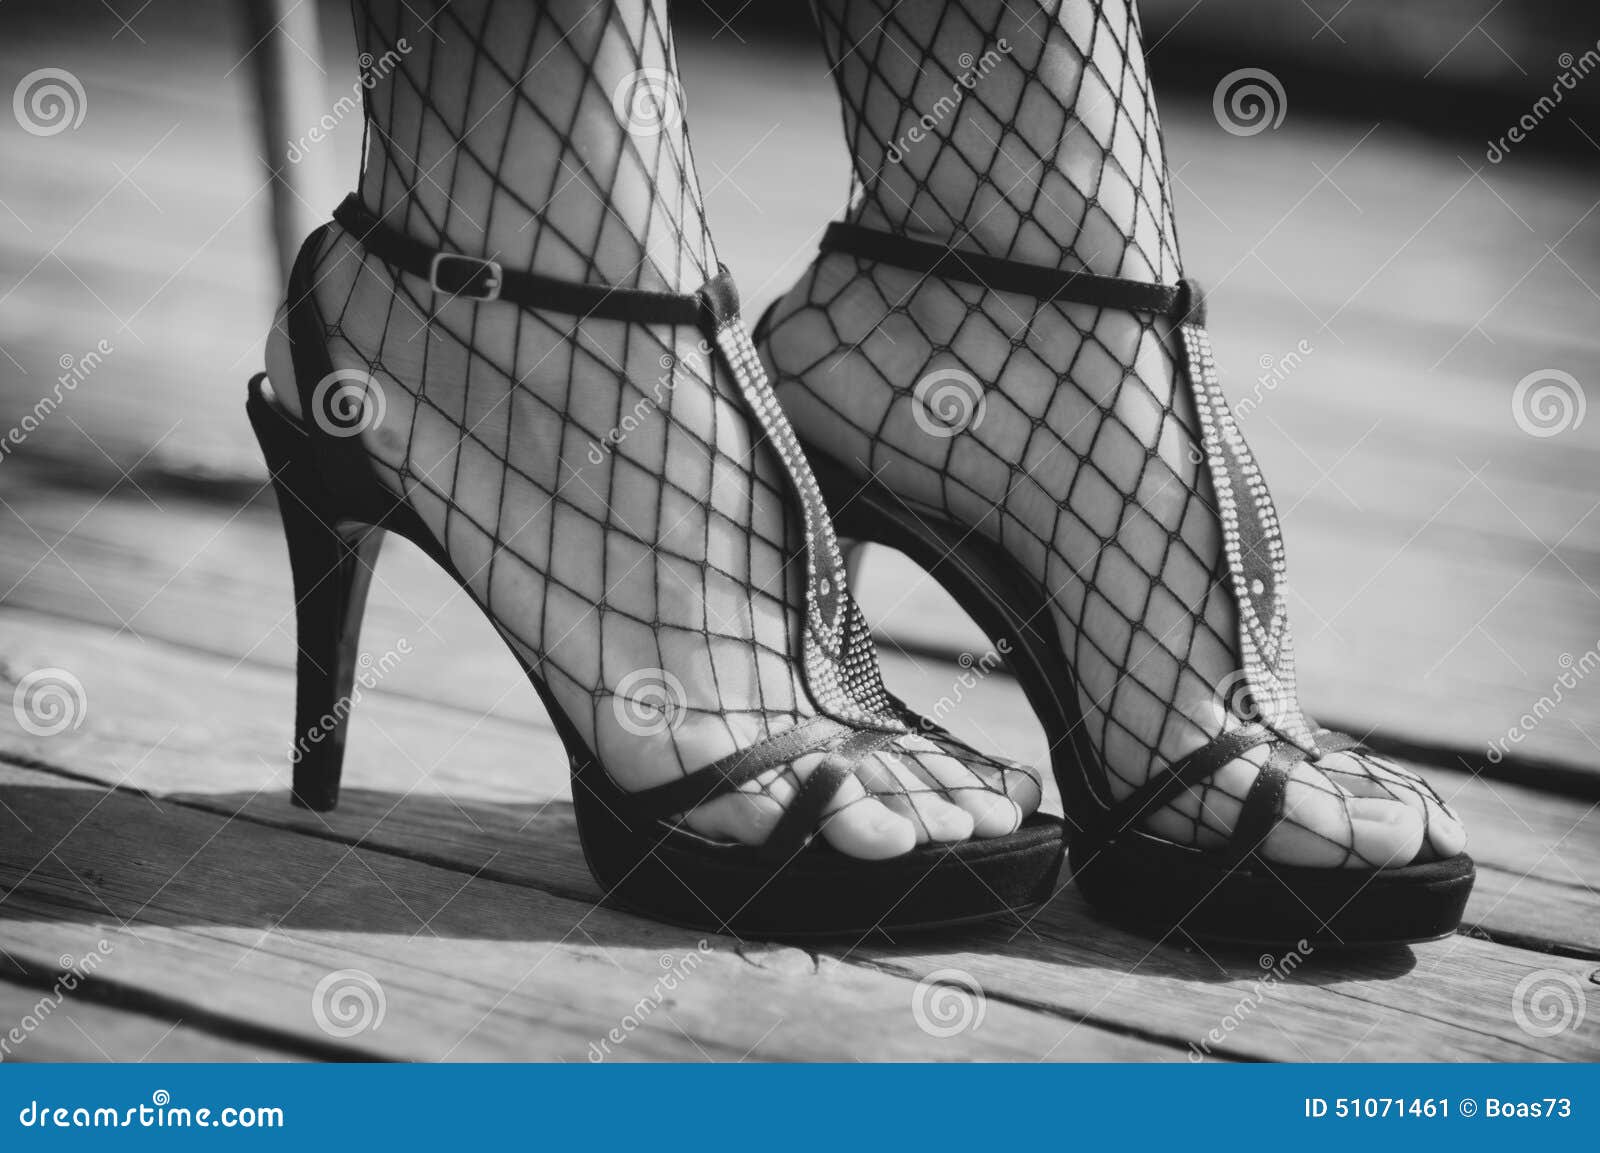 Female Legs in Heels. Female Feet in Shoes with High Heel. Shoes Fashion  Shop Stock Image - Image of feet, female: 223551159